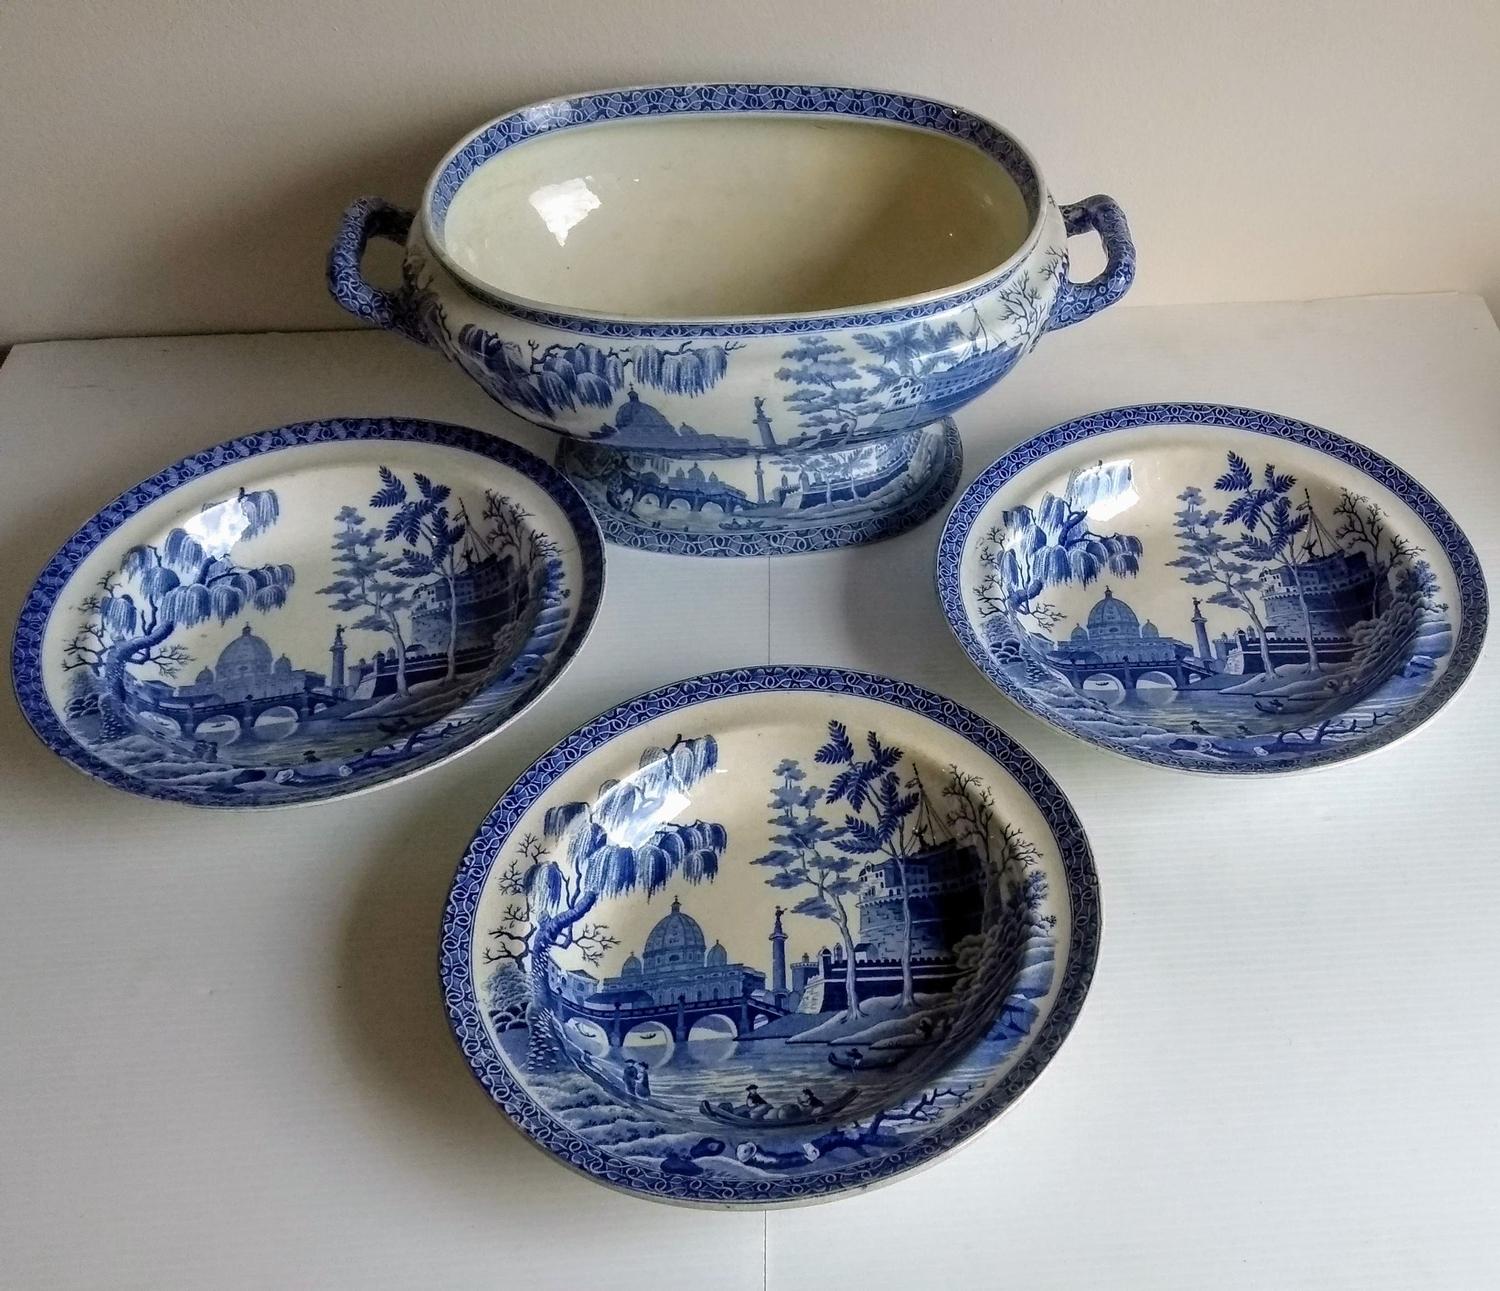 A Spode pearlware soup tureen, circa 1820, printed in underglaze blue with a view of Rome from the